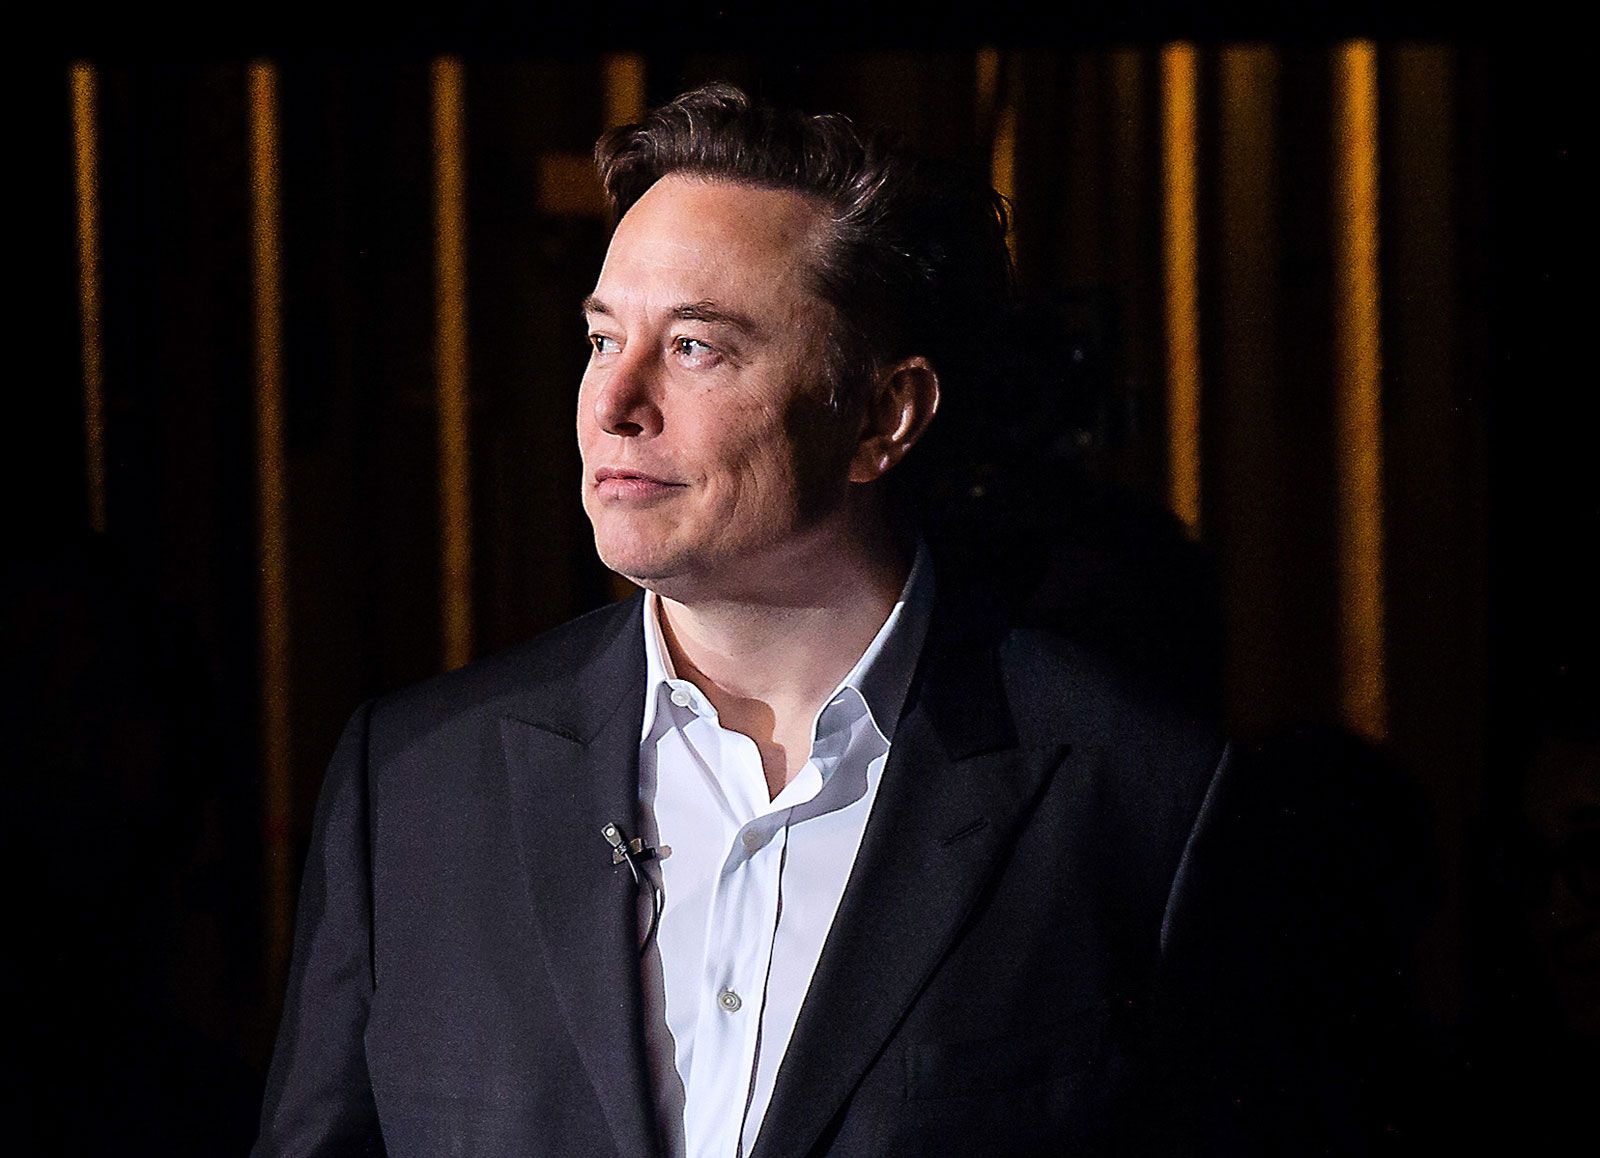 Elon Musk implements temporary reading restrictions on Twitter.